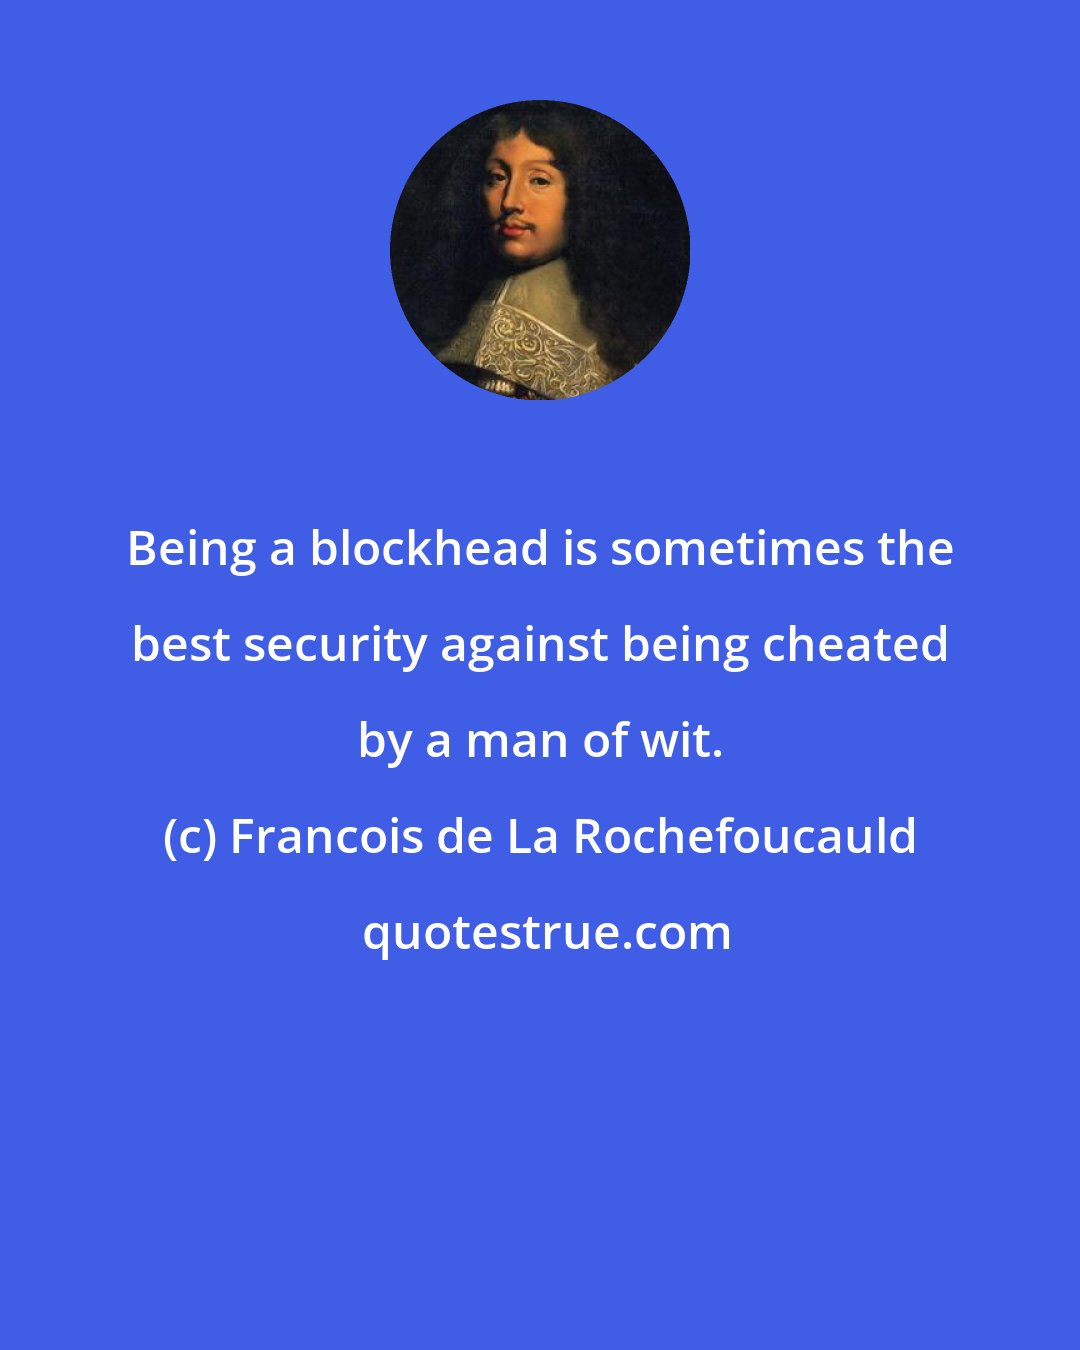 Francois de La Rochefoucauld: Being a blockhead is sometimes the best security against being cheated by a man of wit.